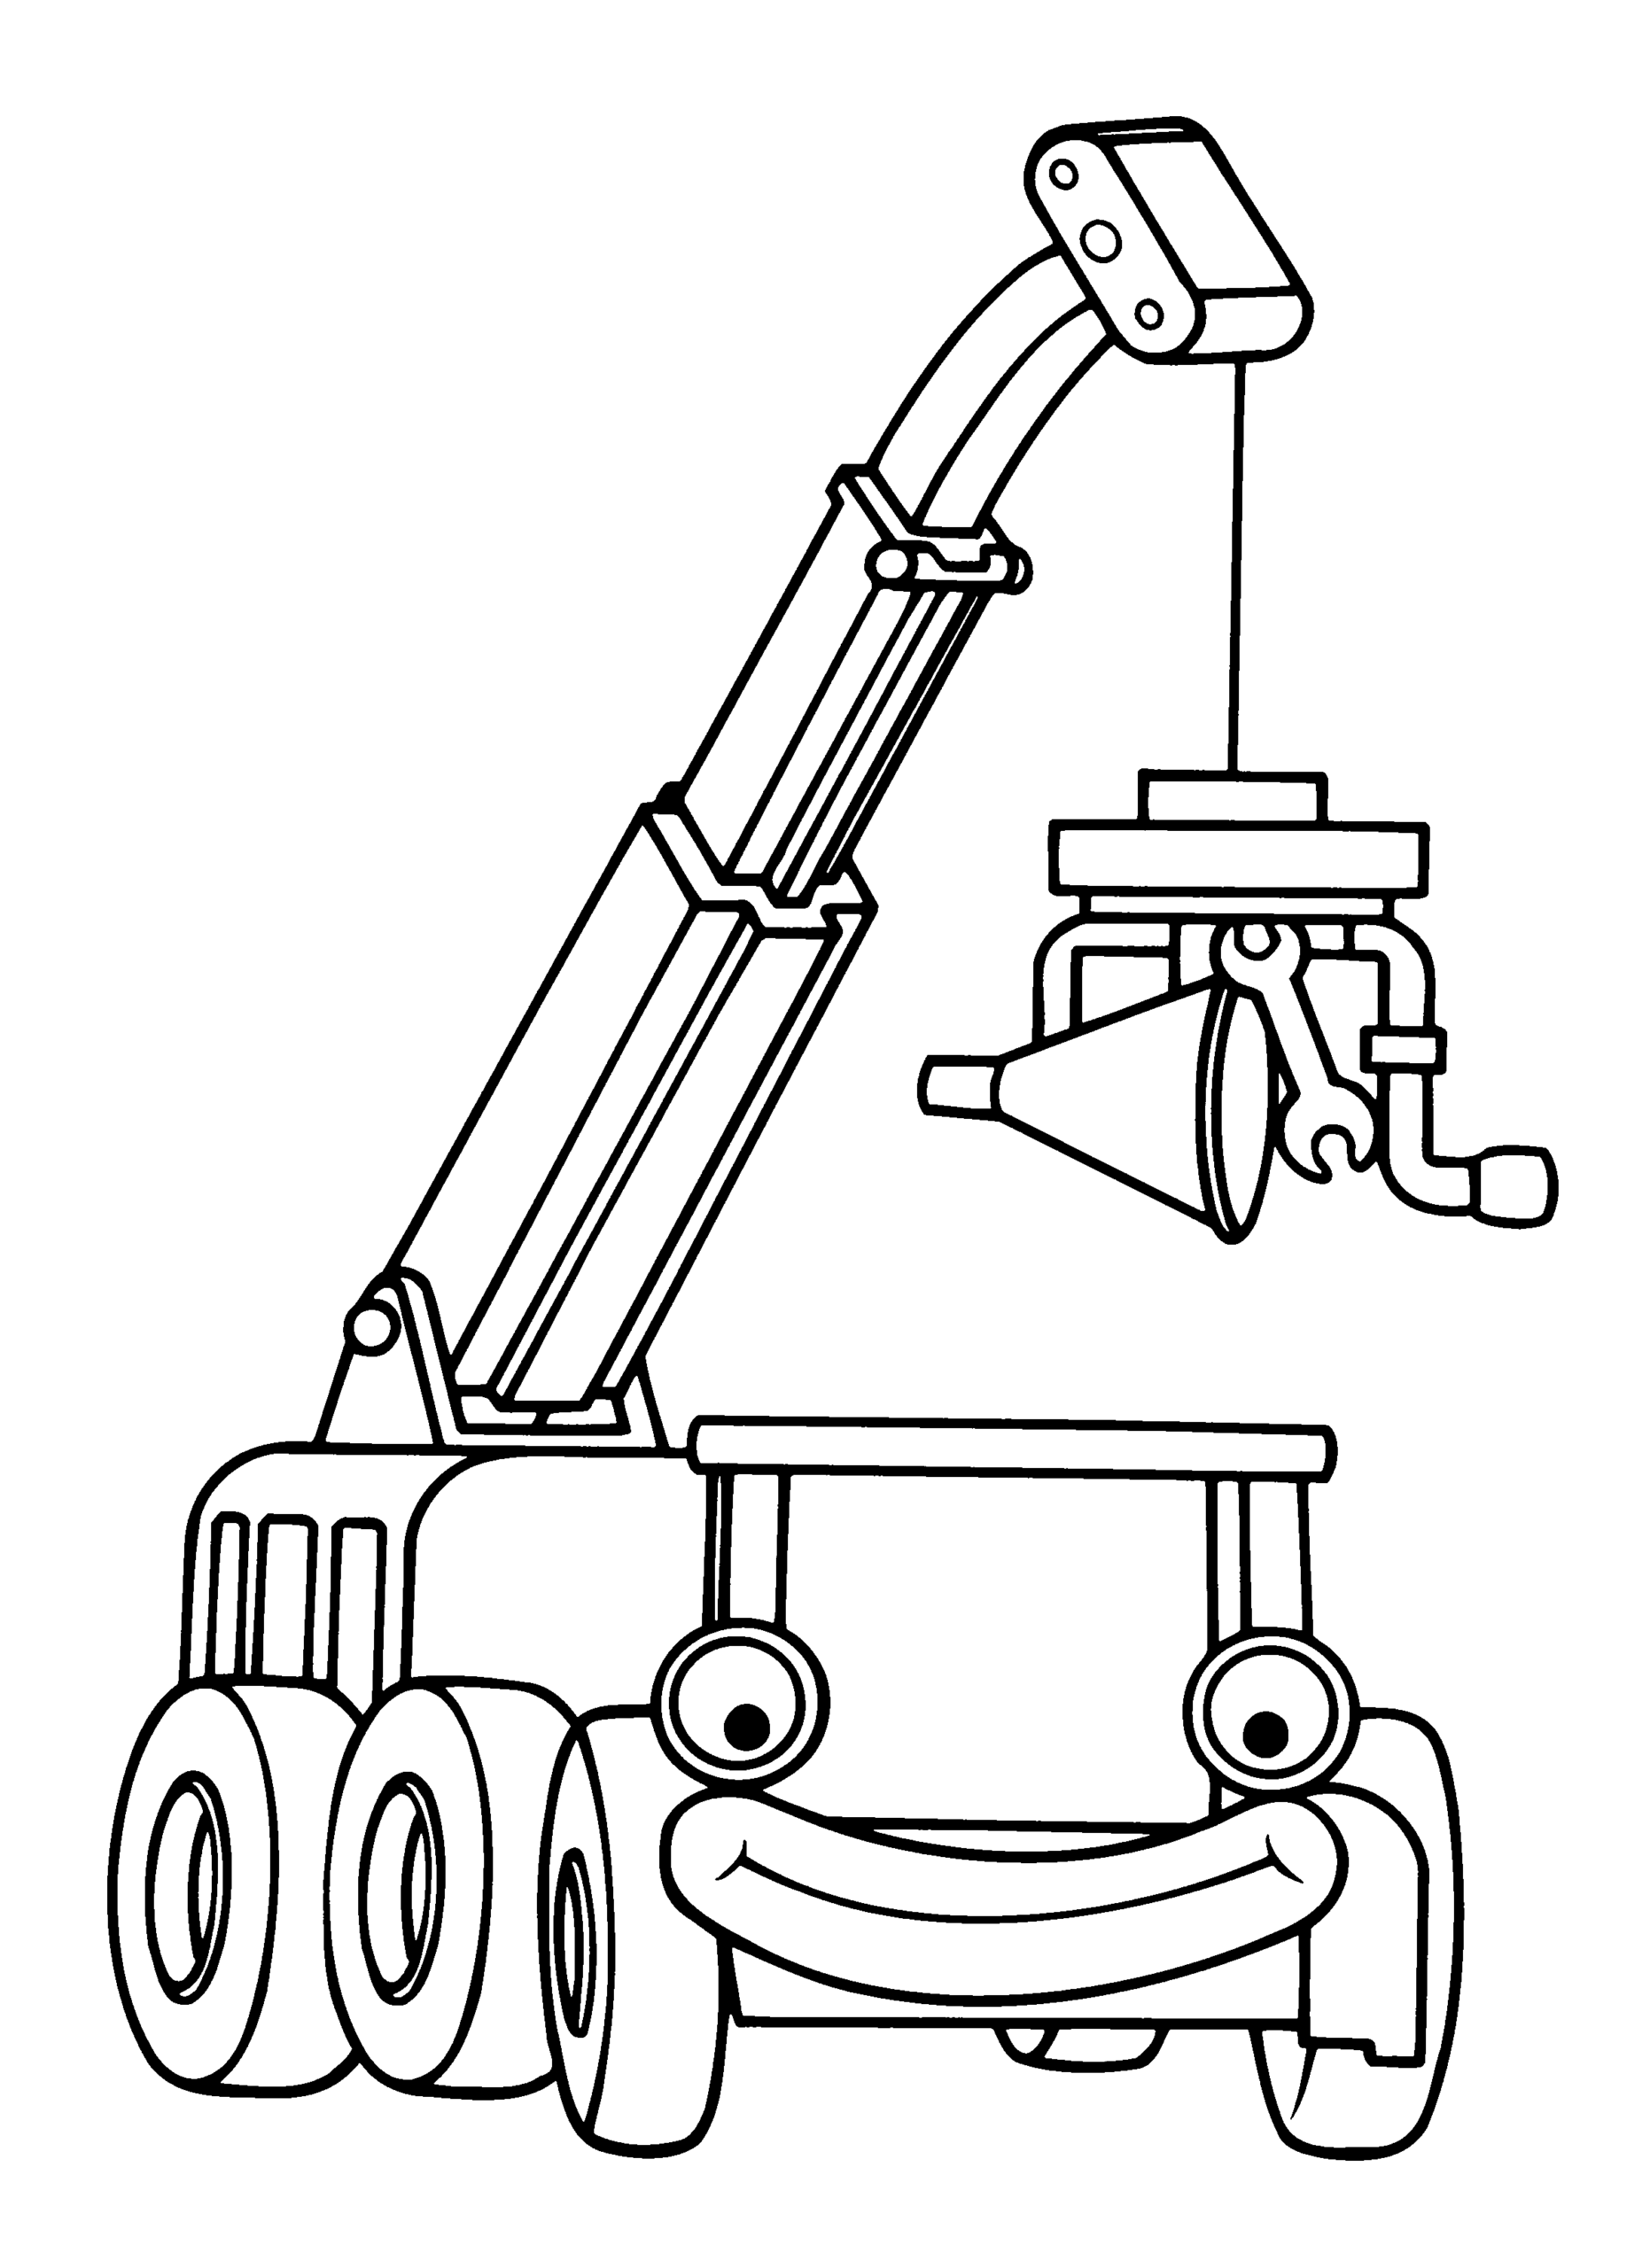 Bob the Builder Coloring Pages TV Film bob the builder 29 Printable 2020 01047 Coloring4free